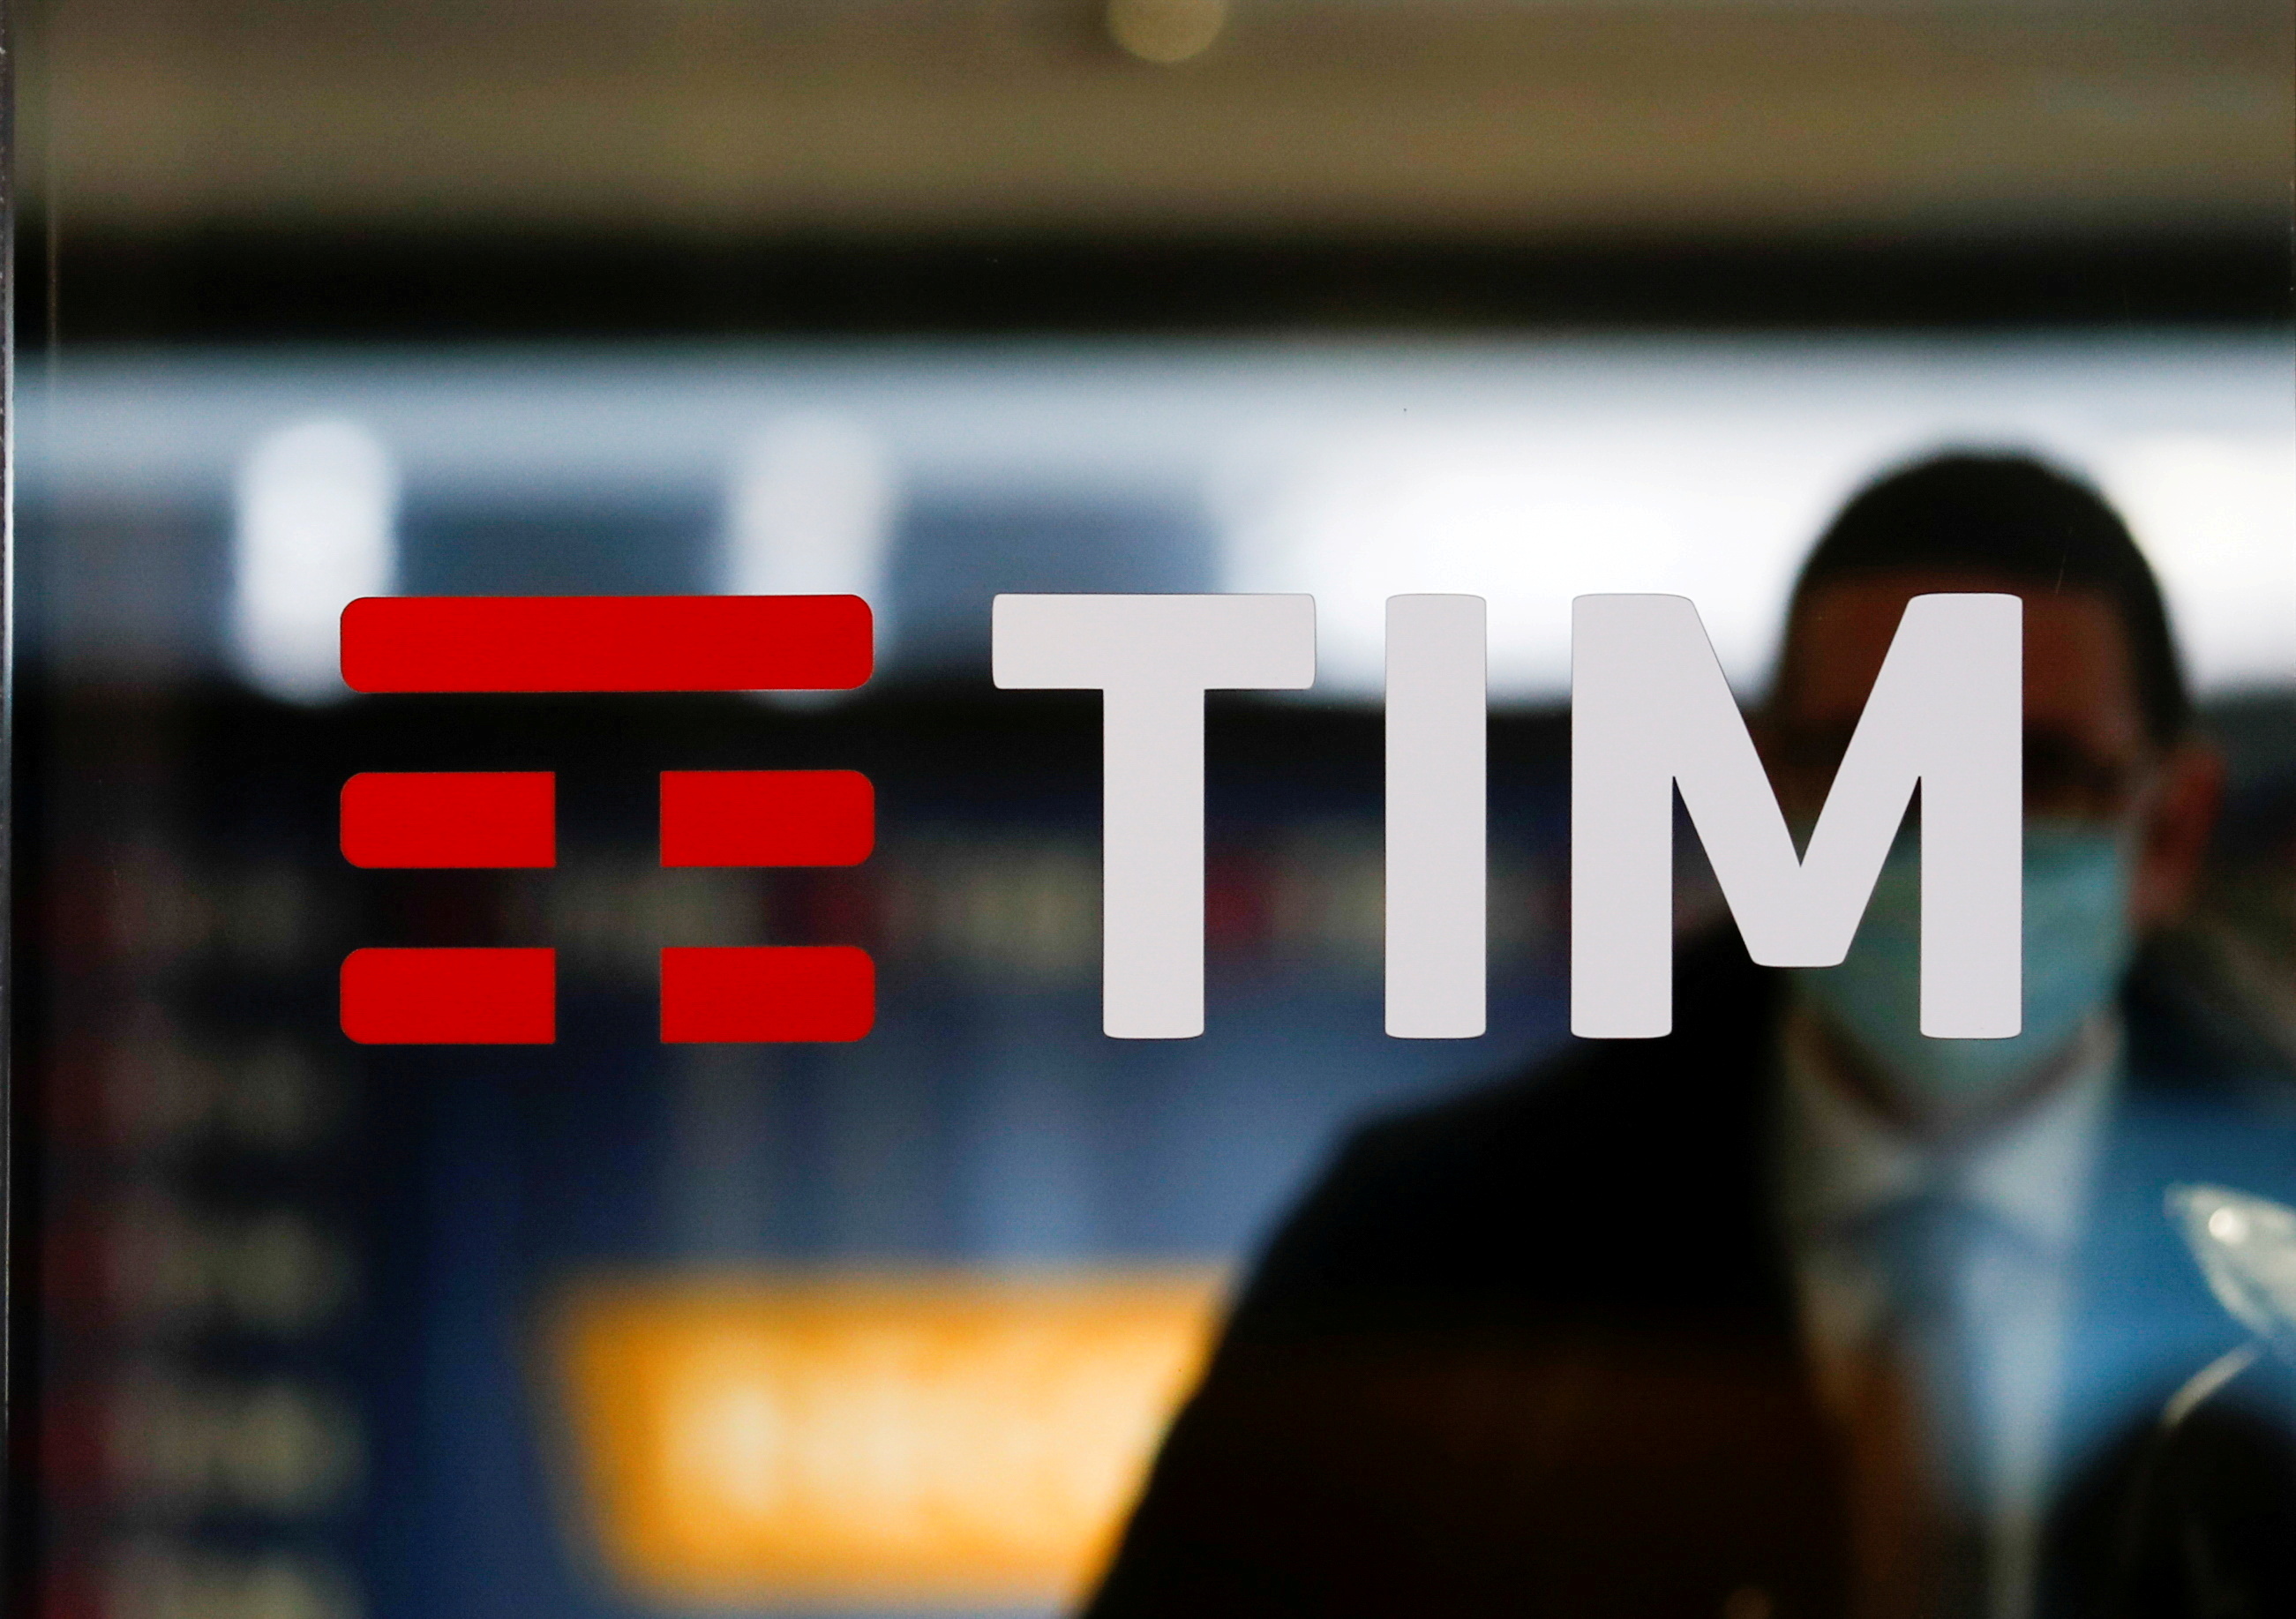 The TIM logo is seen at its headquarters in Rome, Italy November 22, 2021. REUTERS/Yara Nardi/File Photo